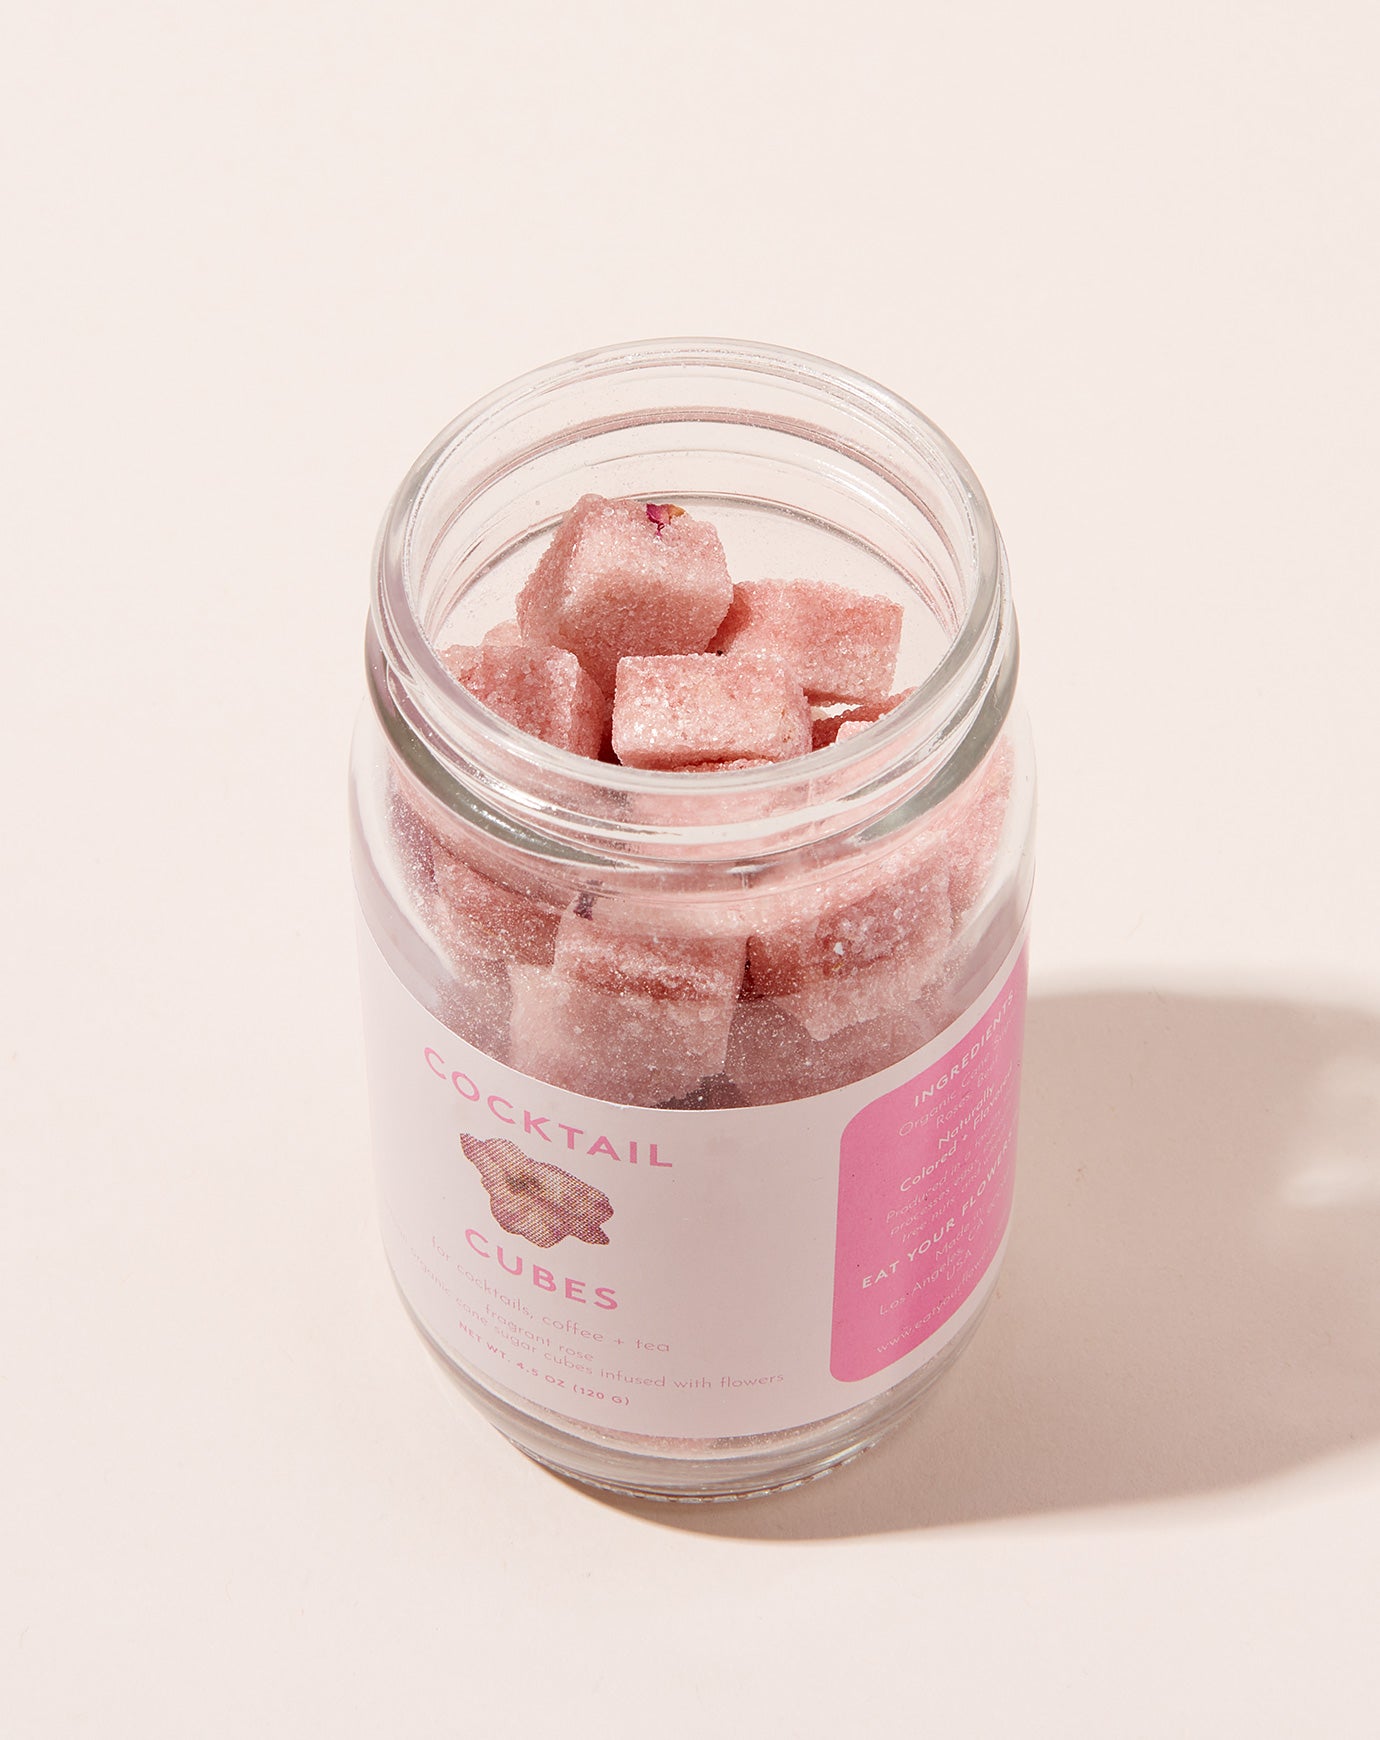 Loria Stern Rose Cocktail Cubes